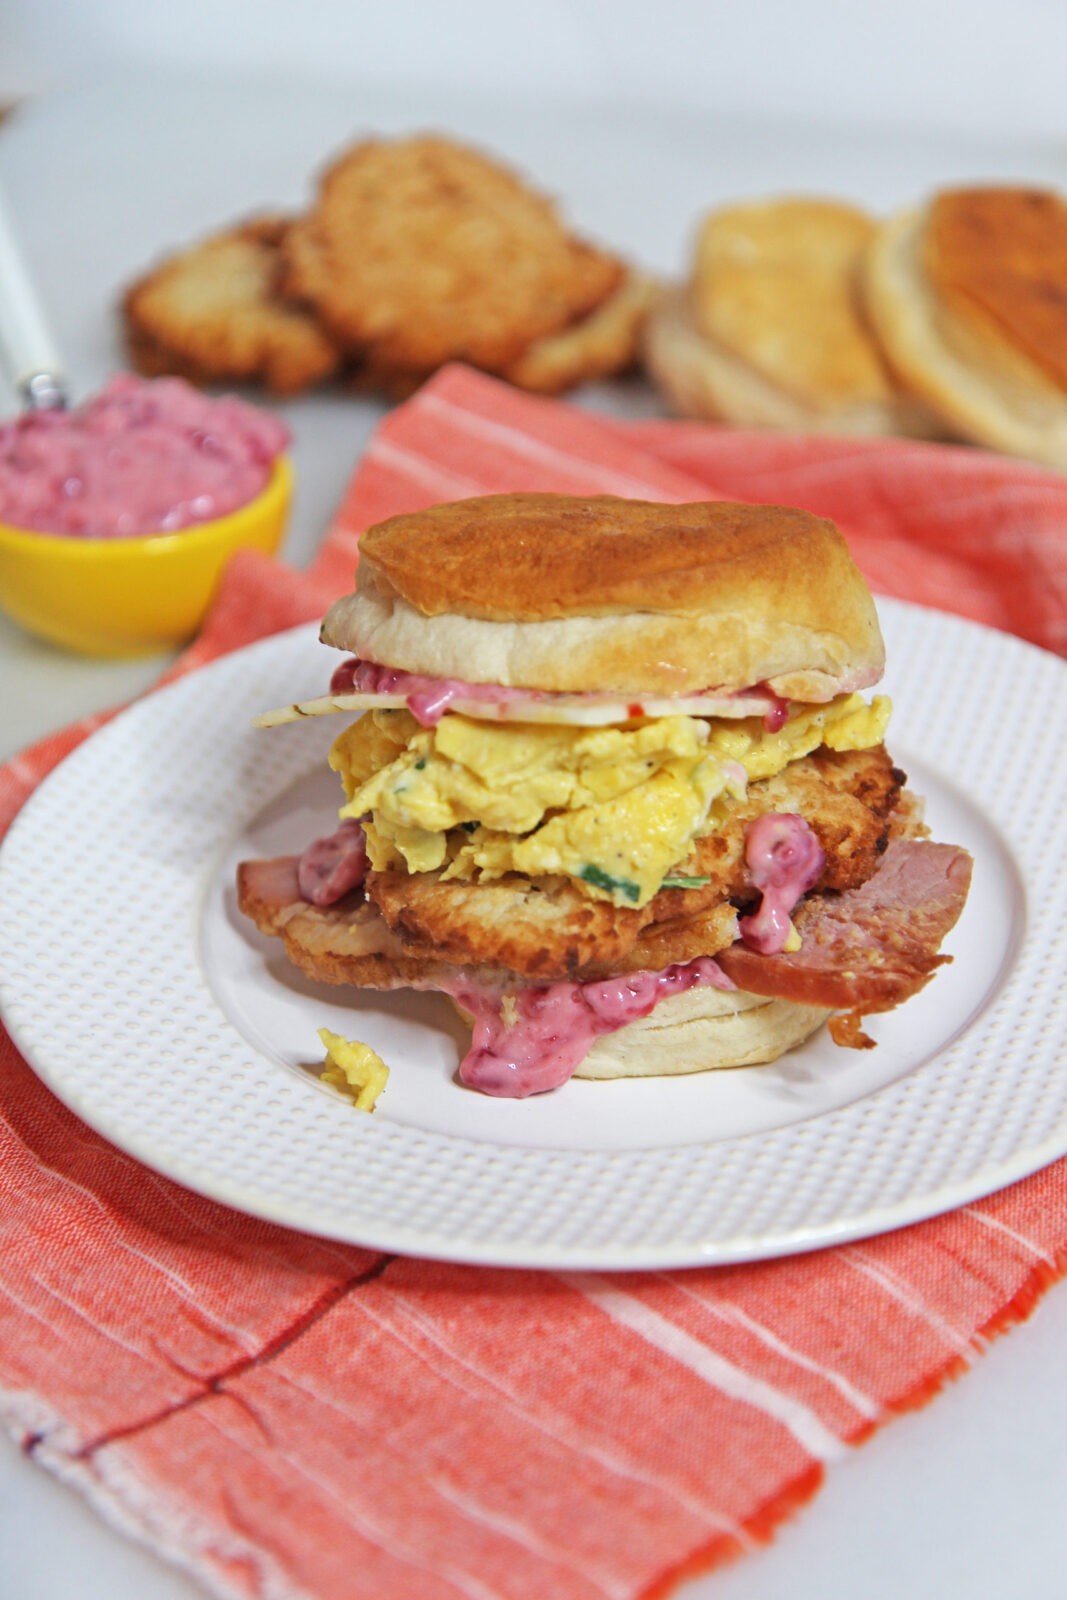 Leftover Ham Egg and Potato Pancake Biscuit Sandwich Recipe. After Christmas, Thanksgiving, or Sunday dinner grab you leftovers for the perfect breakfast sandwich. Ham, egg, mashed potatoes, cranberry sauce all make the ultimate brunch biscuit! Happy Cooking! www.ChopHappy.com #leftovers #ham